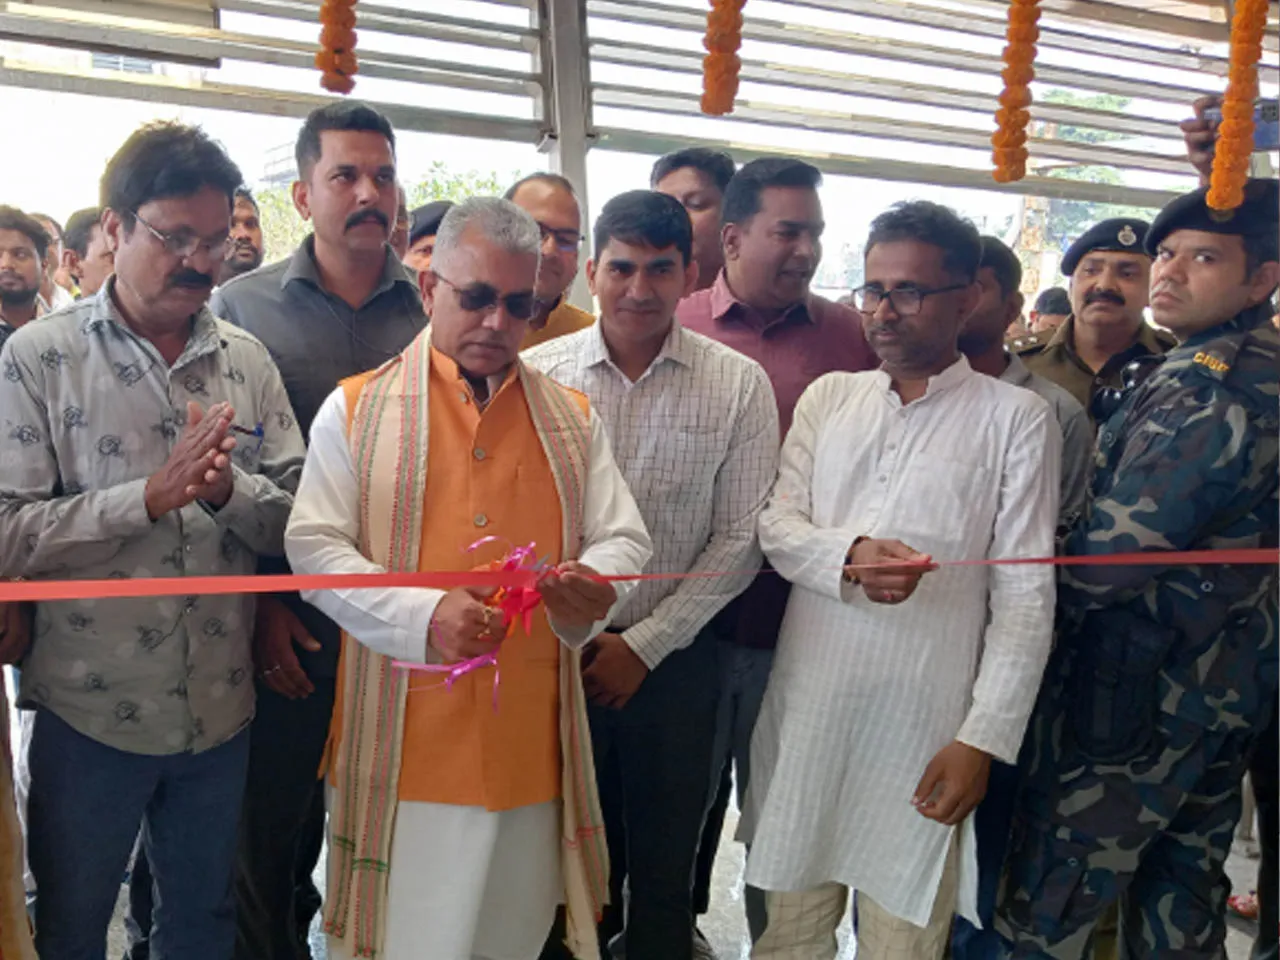 Hon'ble MP Shri Dilip Ghosh Inaugurated The New Ticket Booking Counters